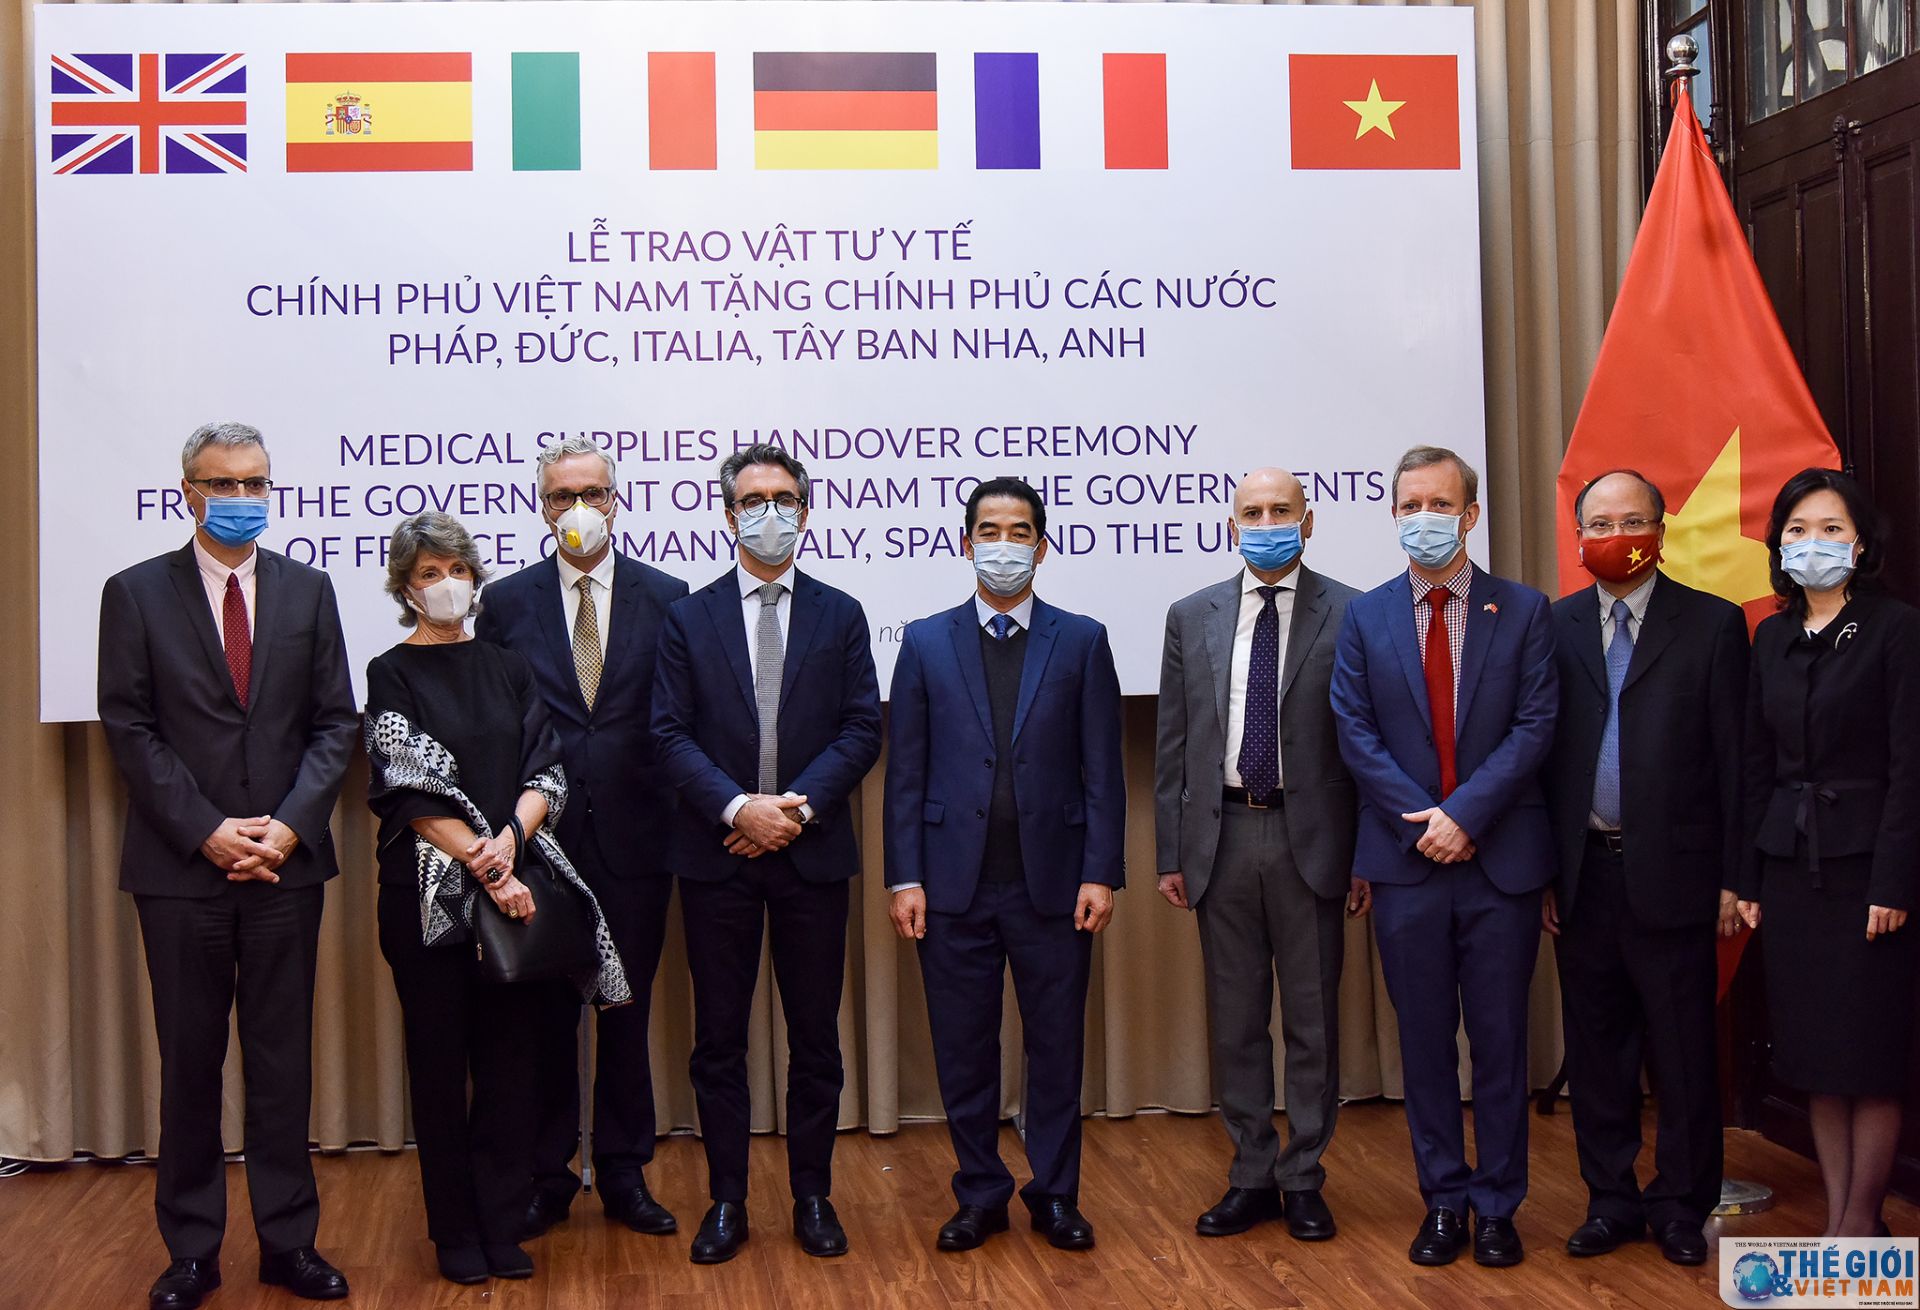 Vietnam presents 550,000 face masks to five European countries to help contain COVID-19